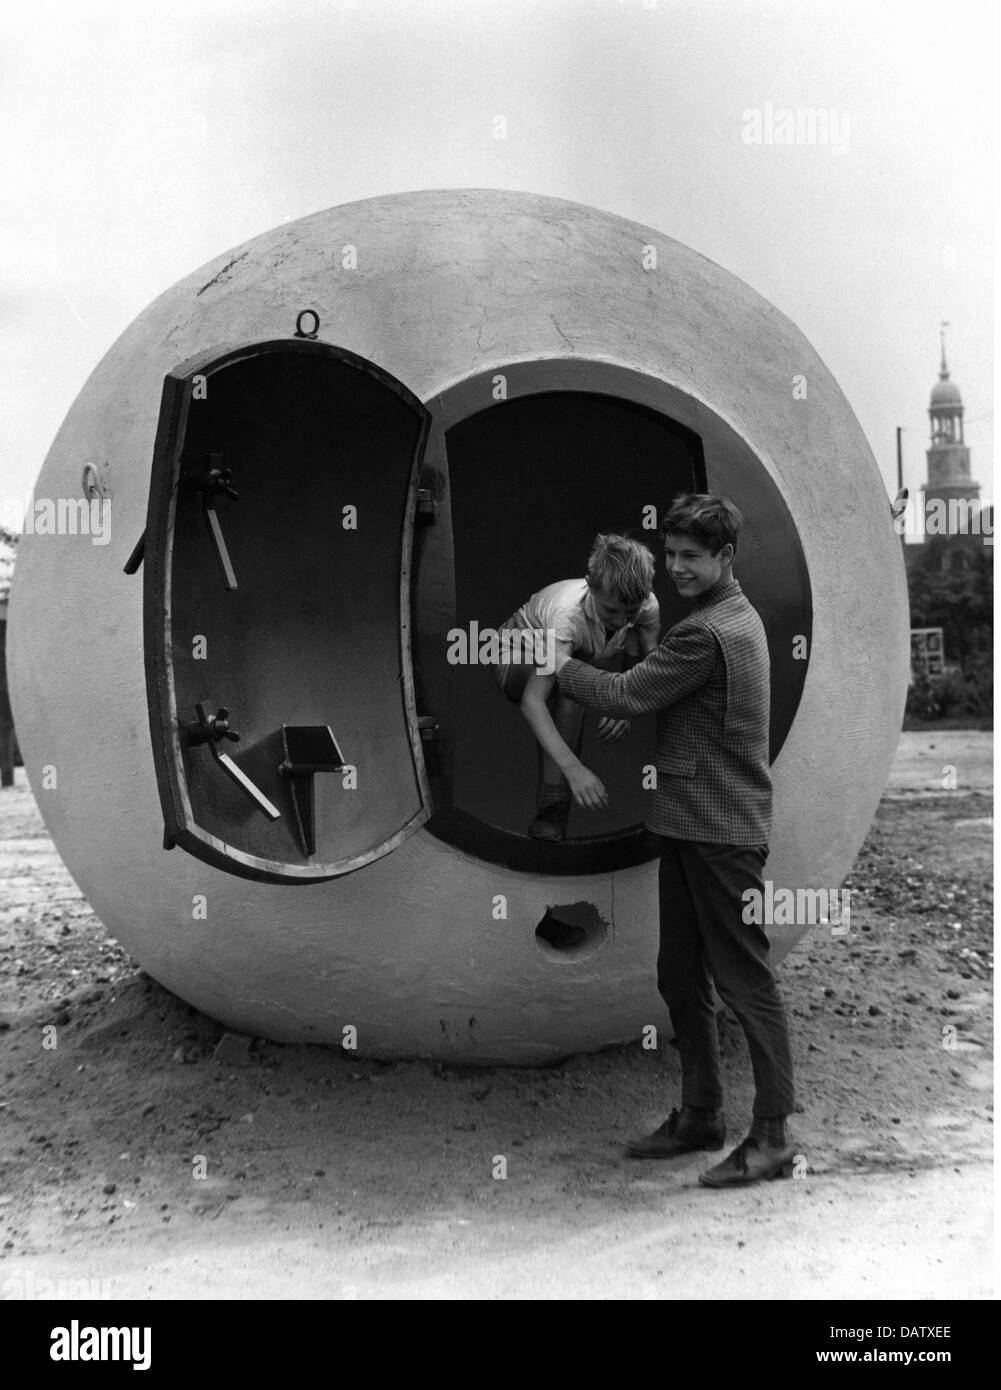 cold war, armoured concrete bunker, so called 'atom football', Hamburg, Germany, 1960s, Additional-Rights-Clearences-Not Available Stock Photo